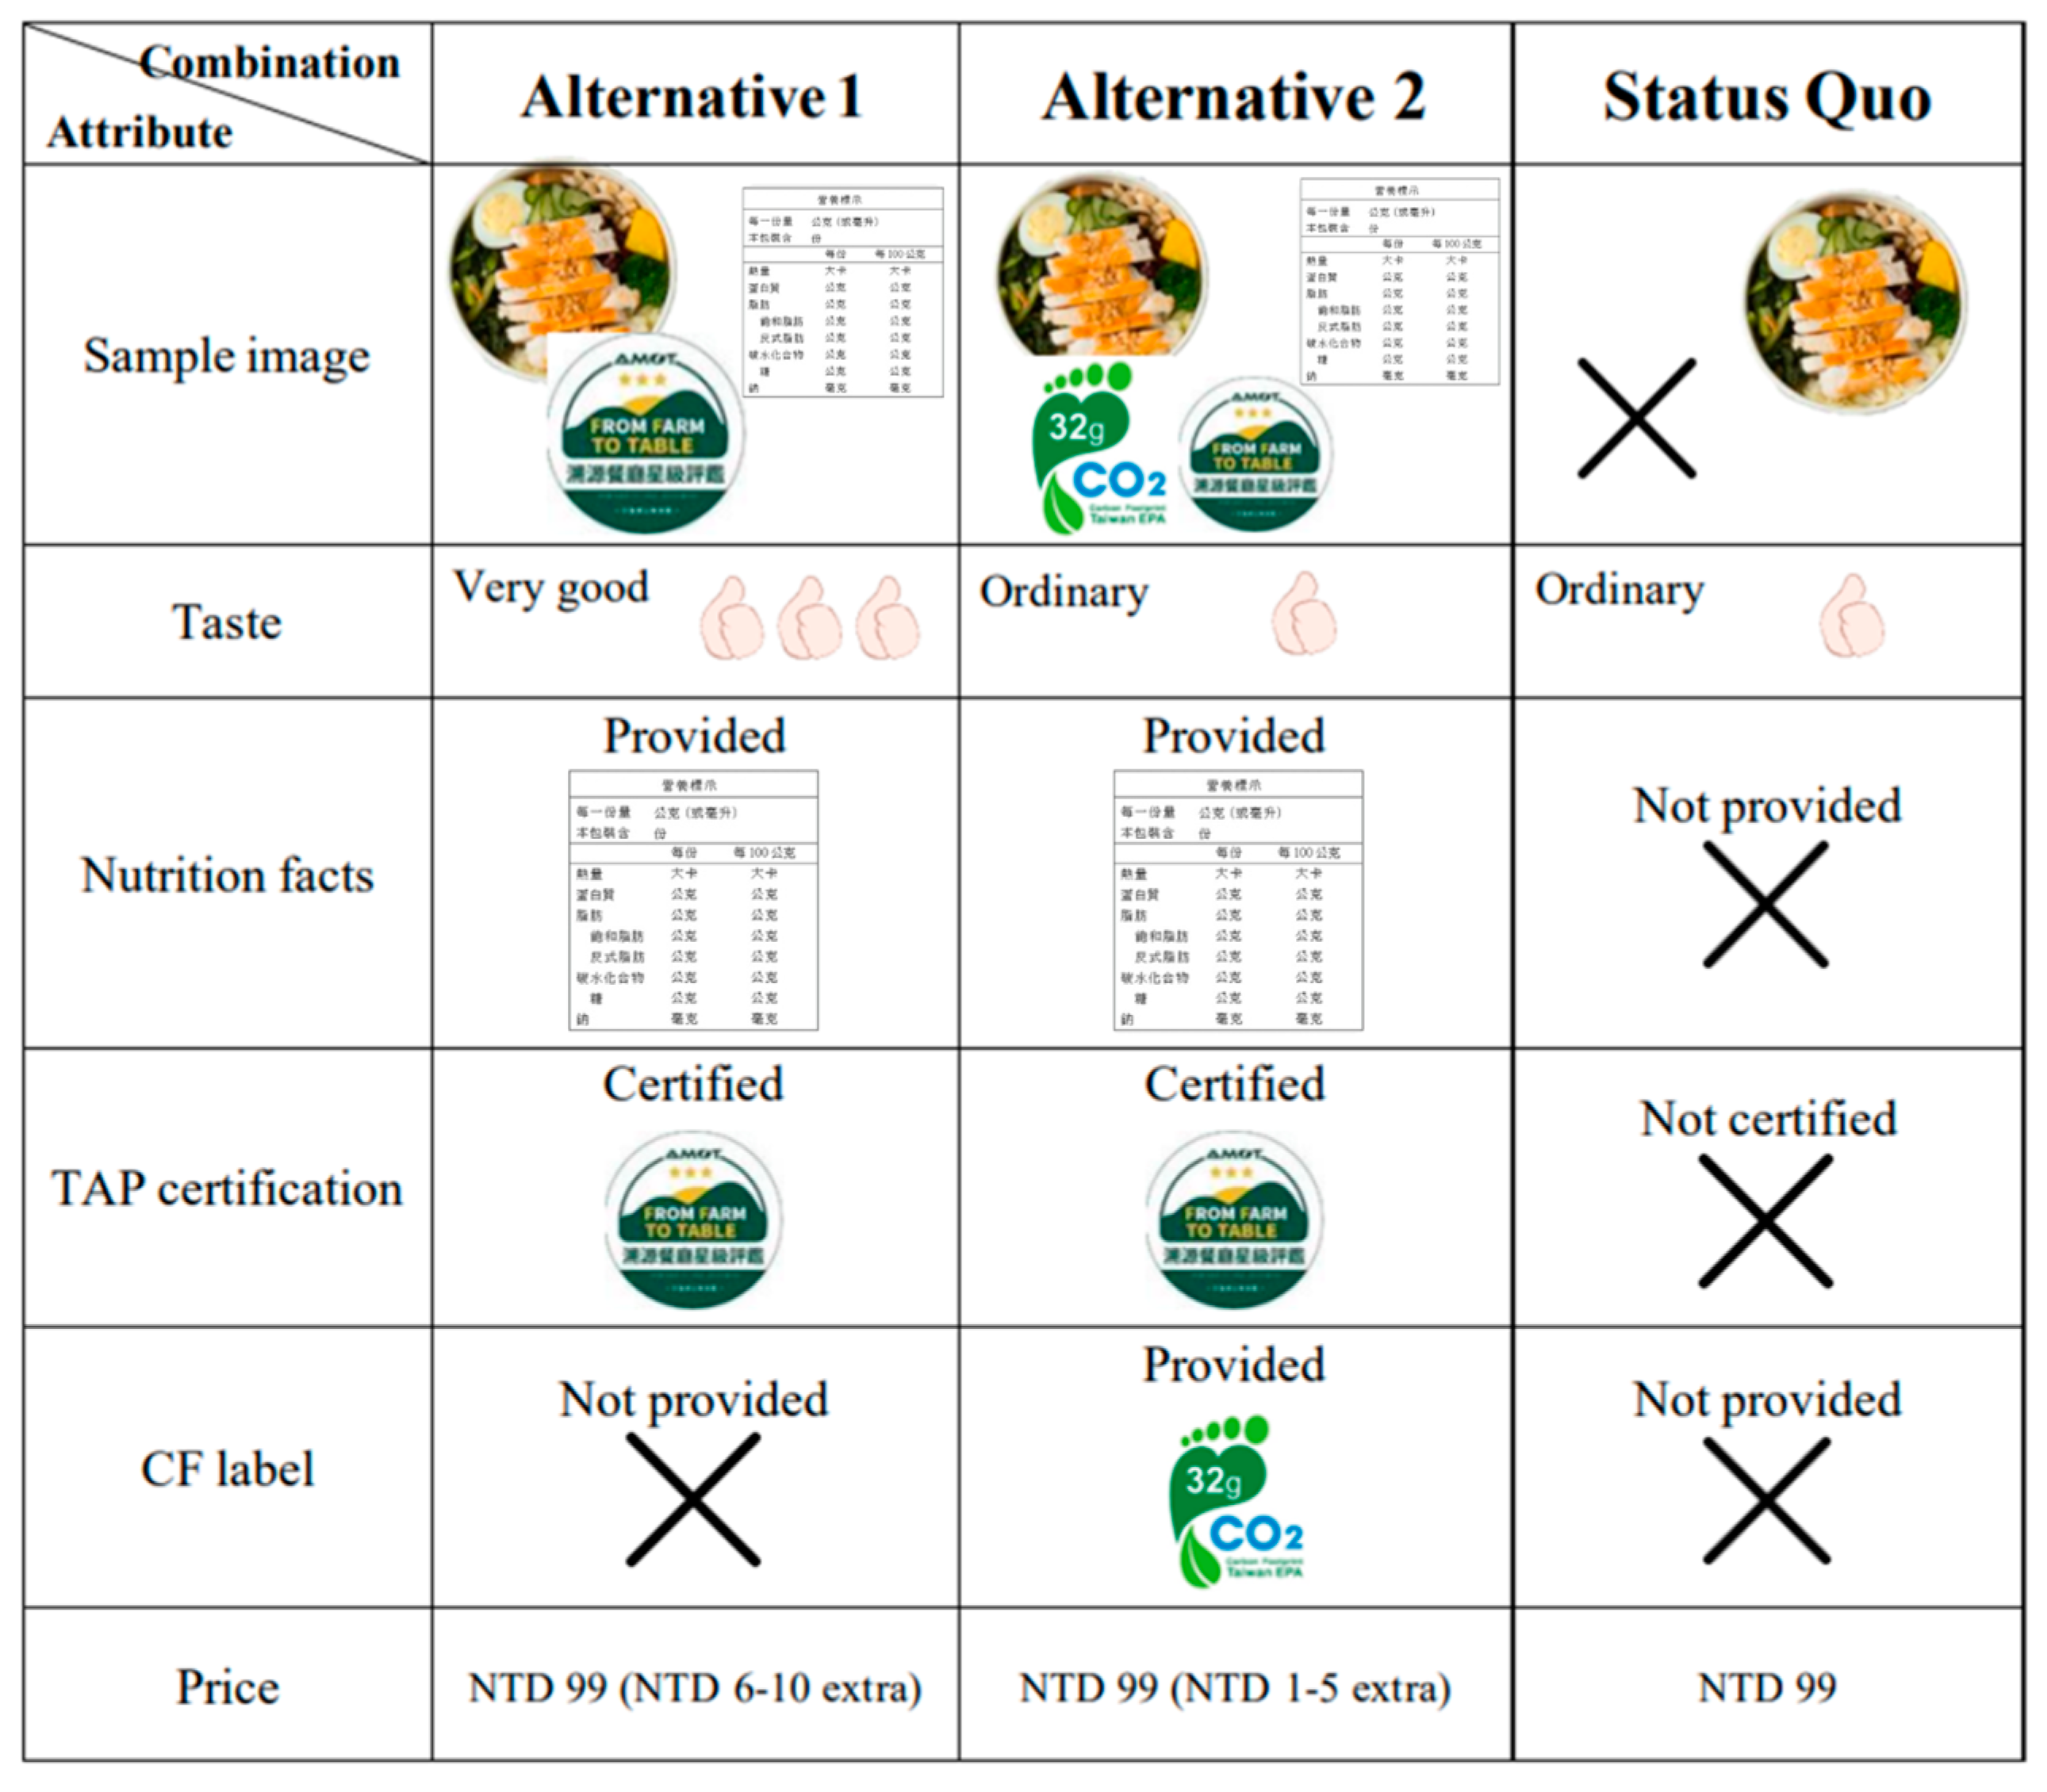 Nutrients Free Full-Text Consumer Attitudes and Preferences for Healthy Boxed Meal Attributes in Taiwan Evidence from a Choice Experiment